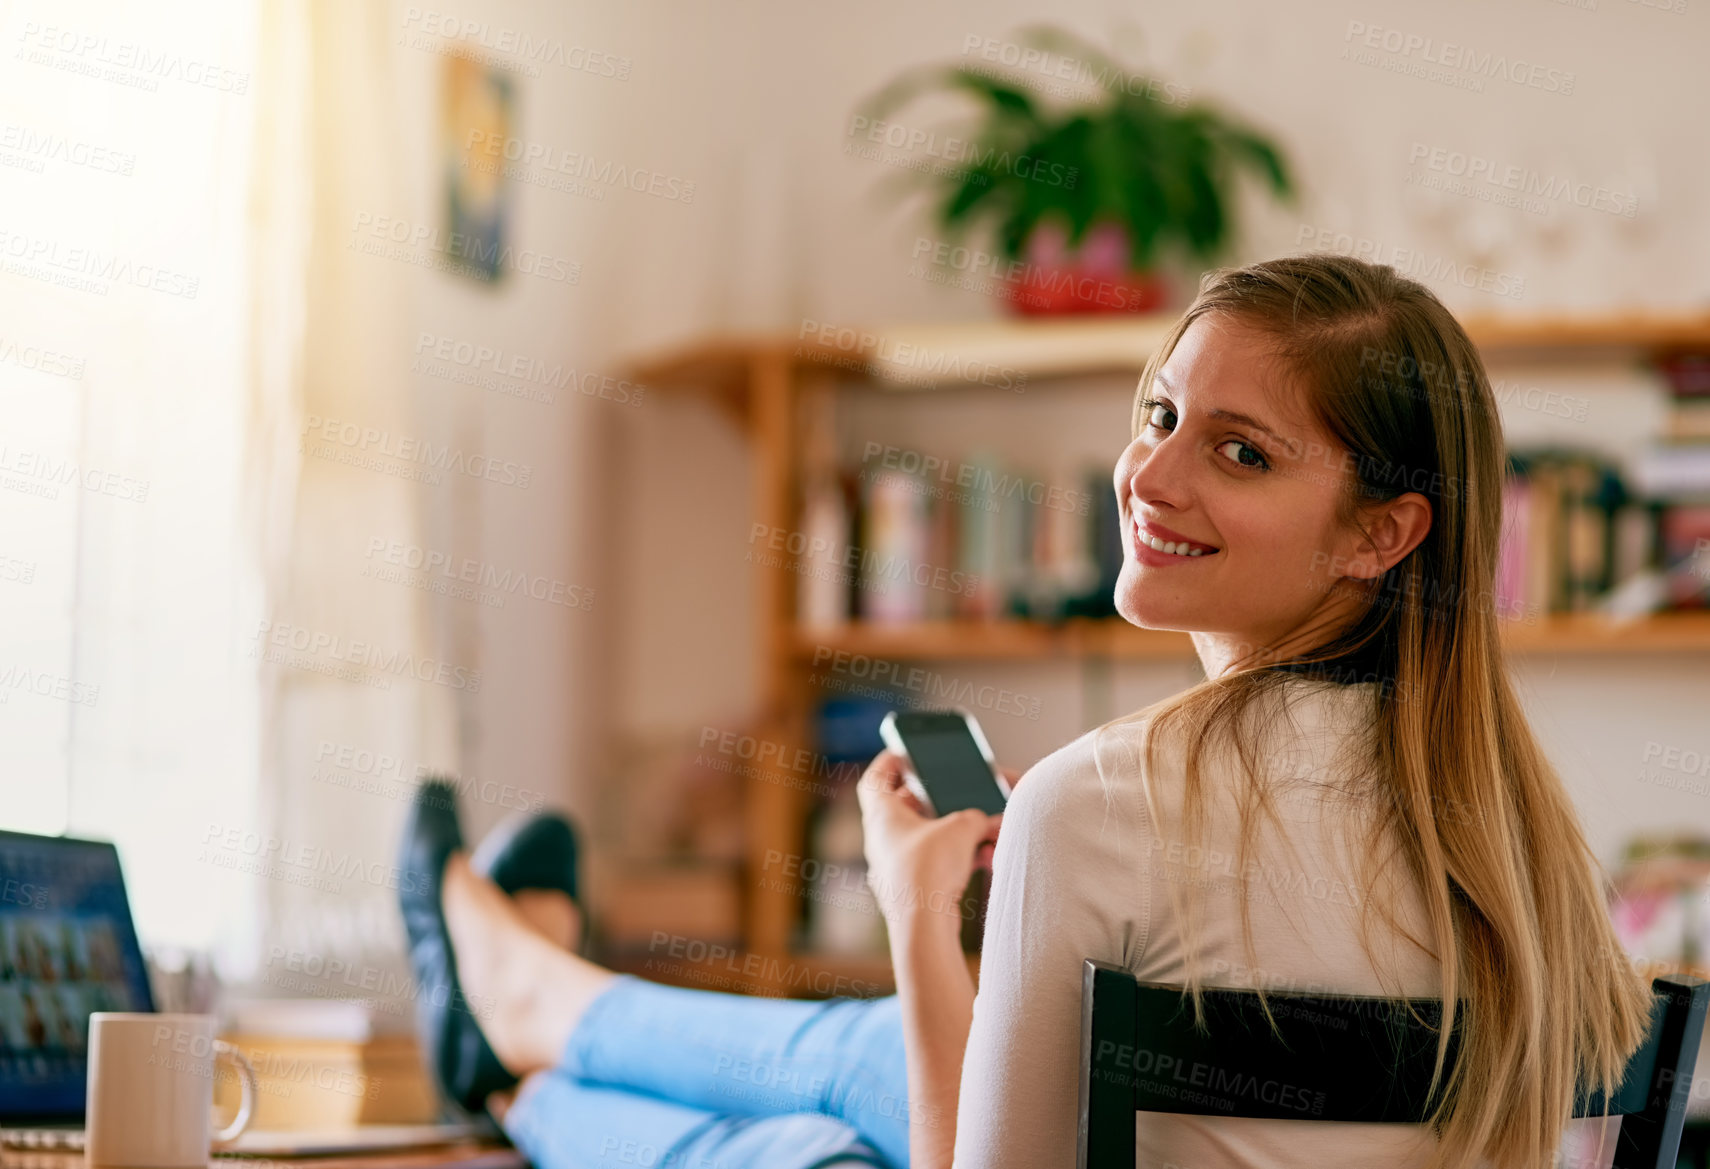 Buy stock photo Portrait of a young woman using her smartphone while sitting at her desk at home